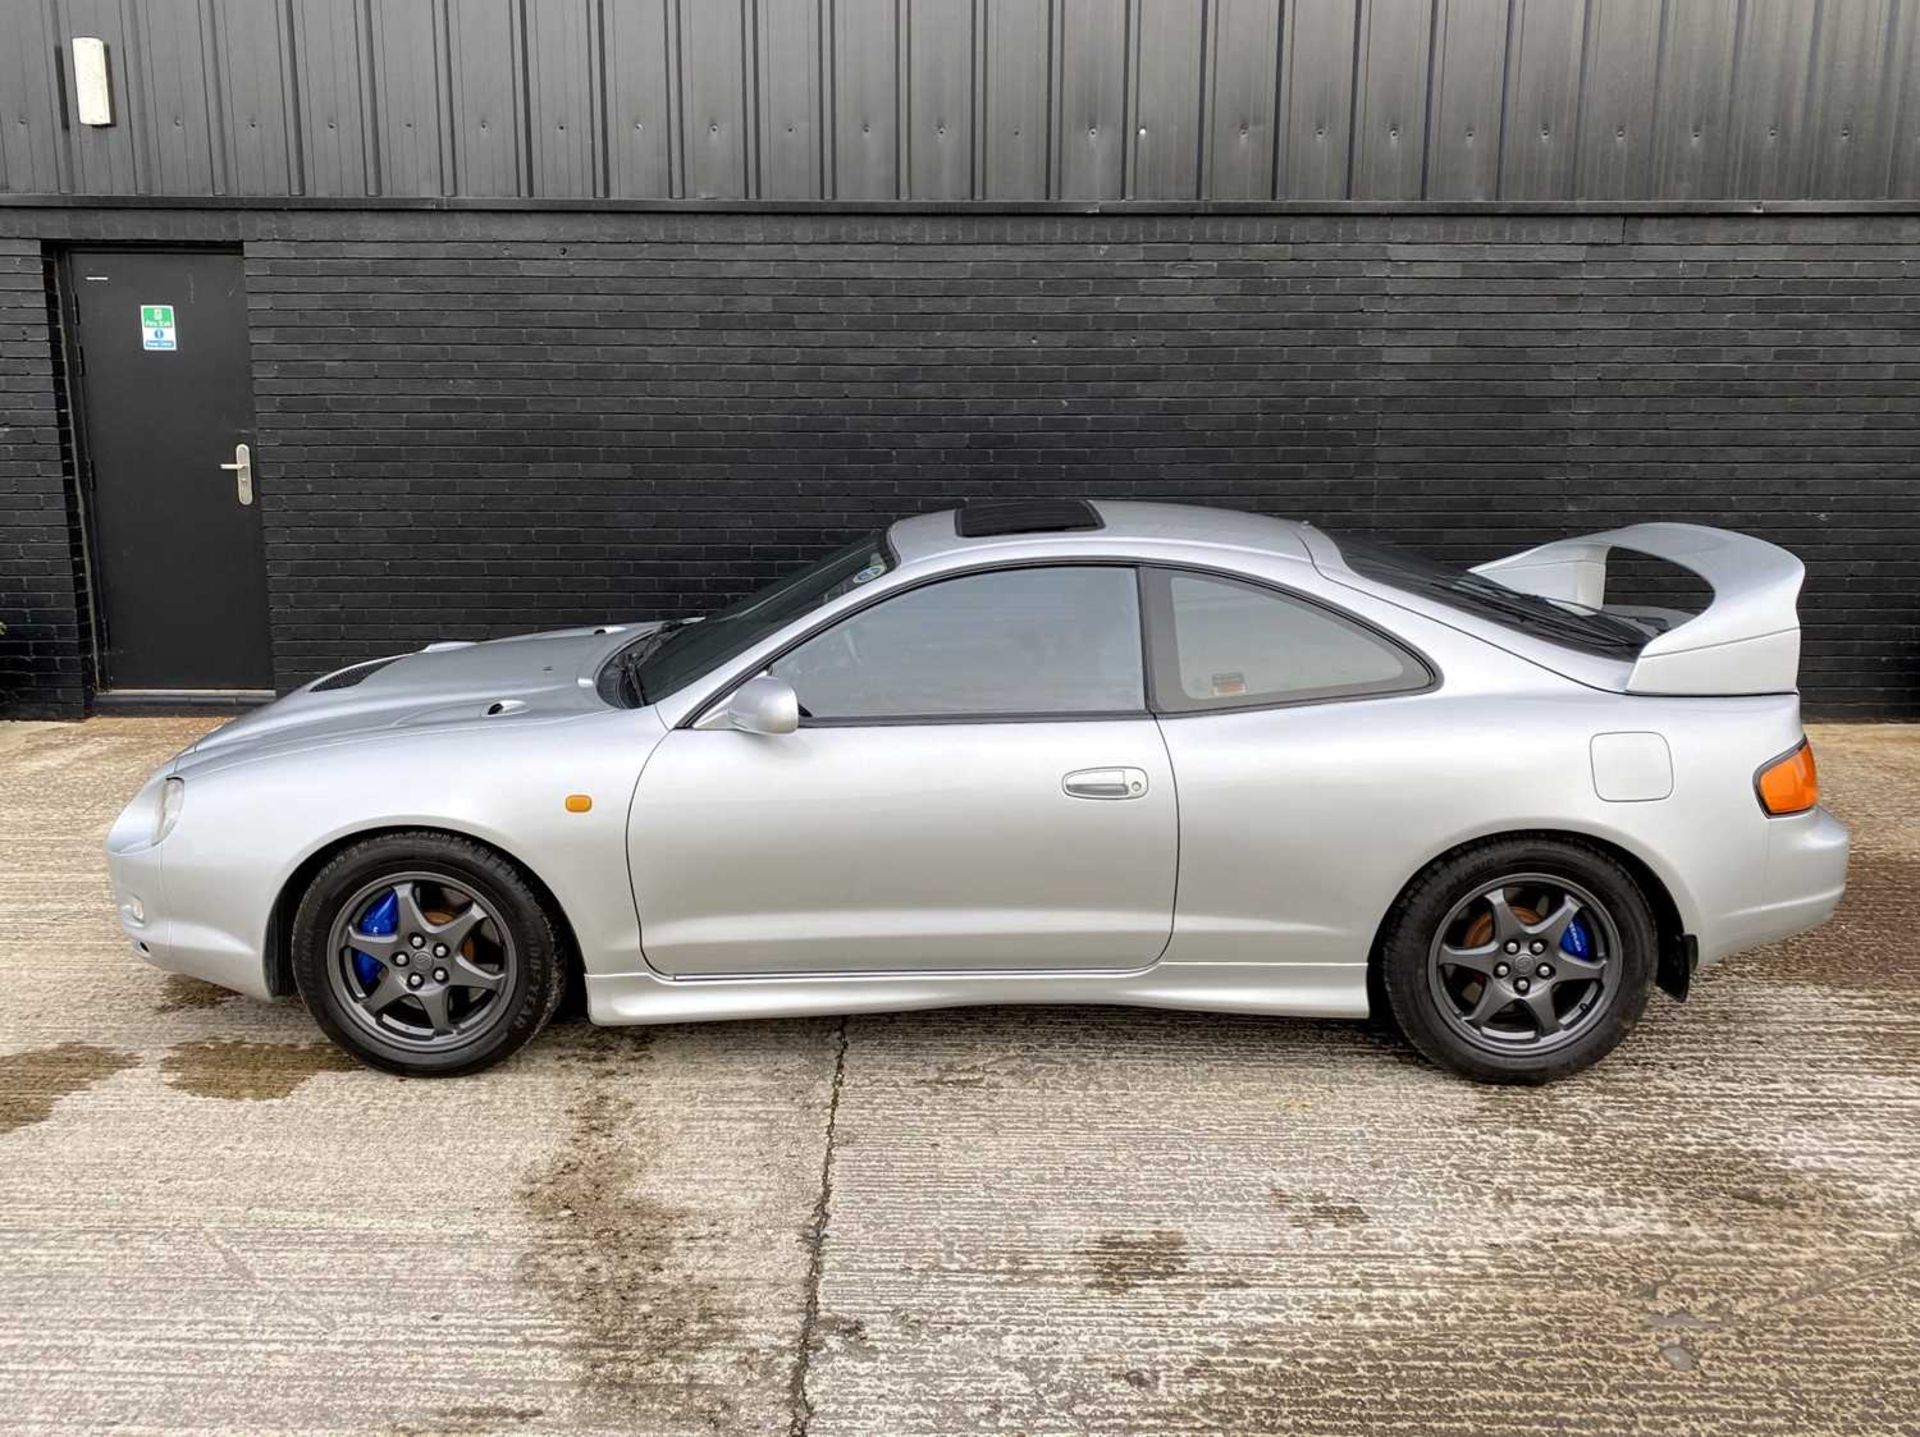 1996 Toyota Celica GT4 ST205 - Image 10 of 65